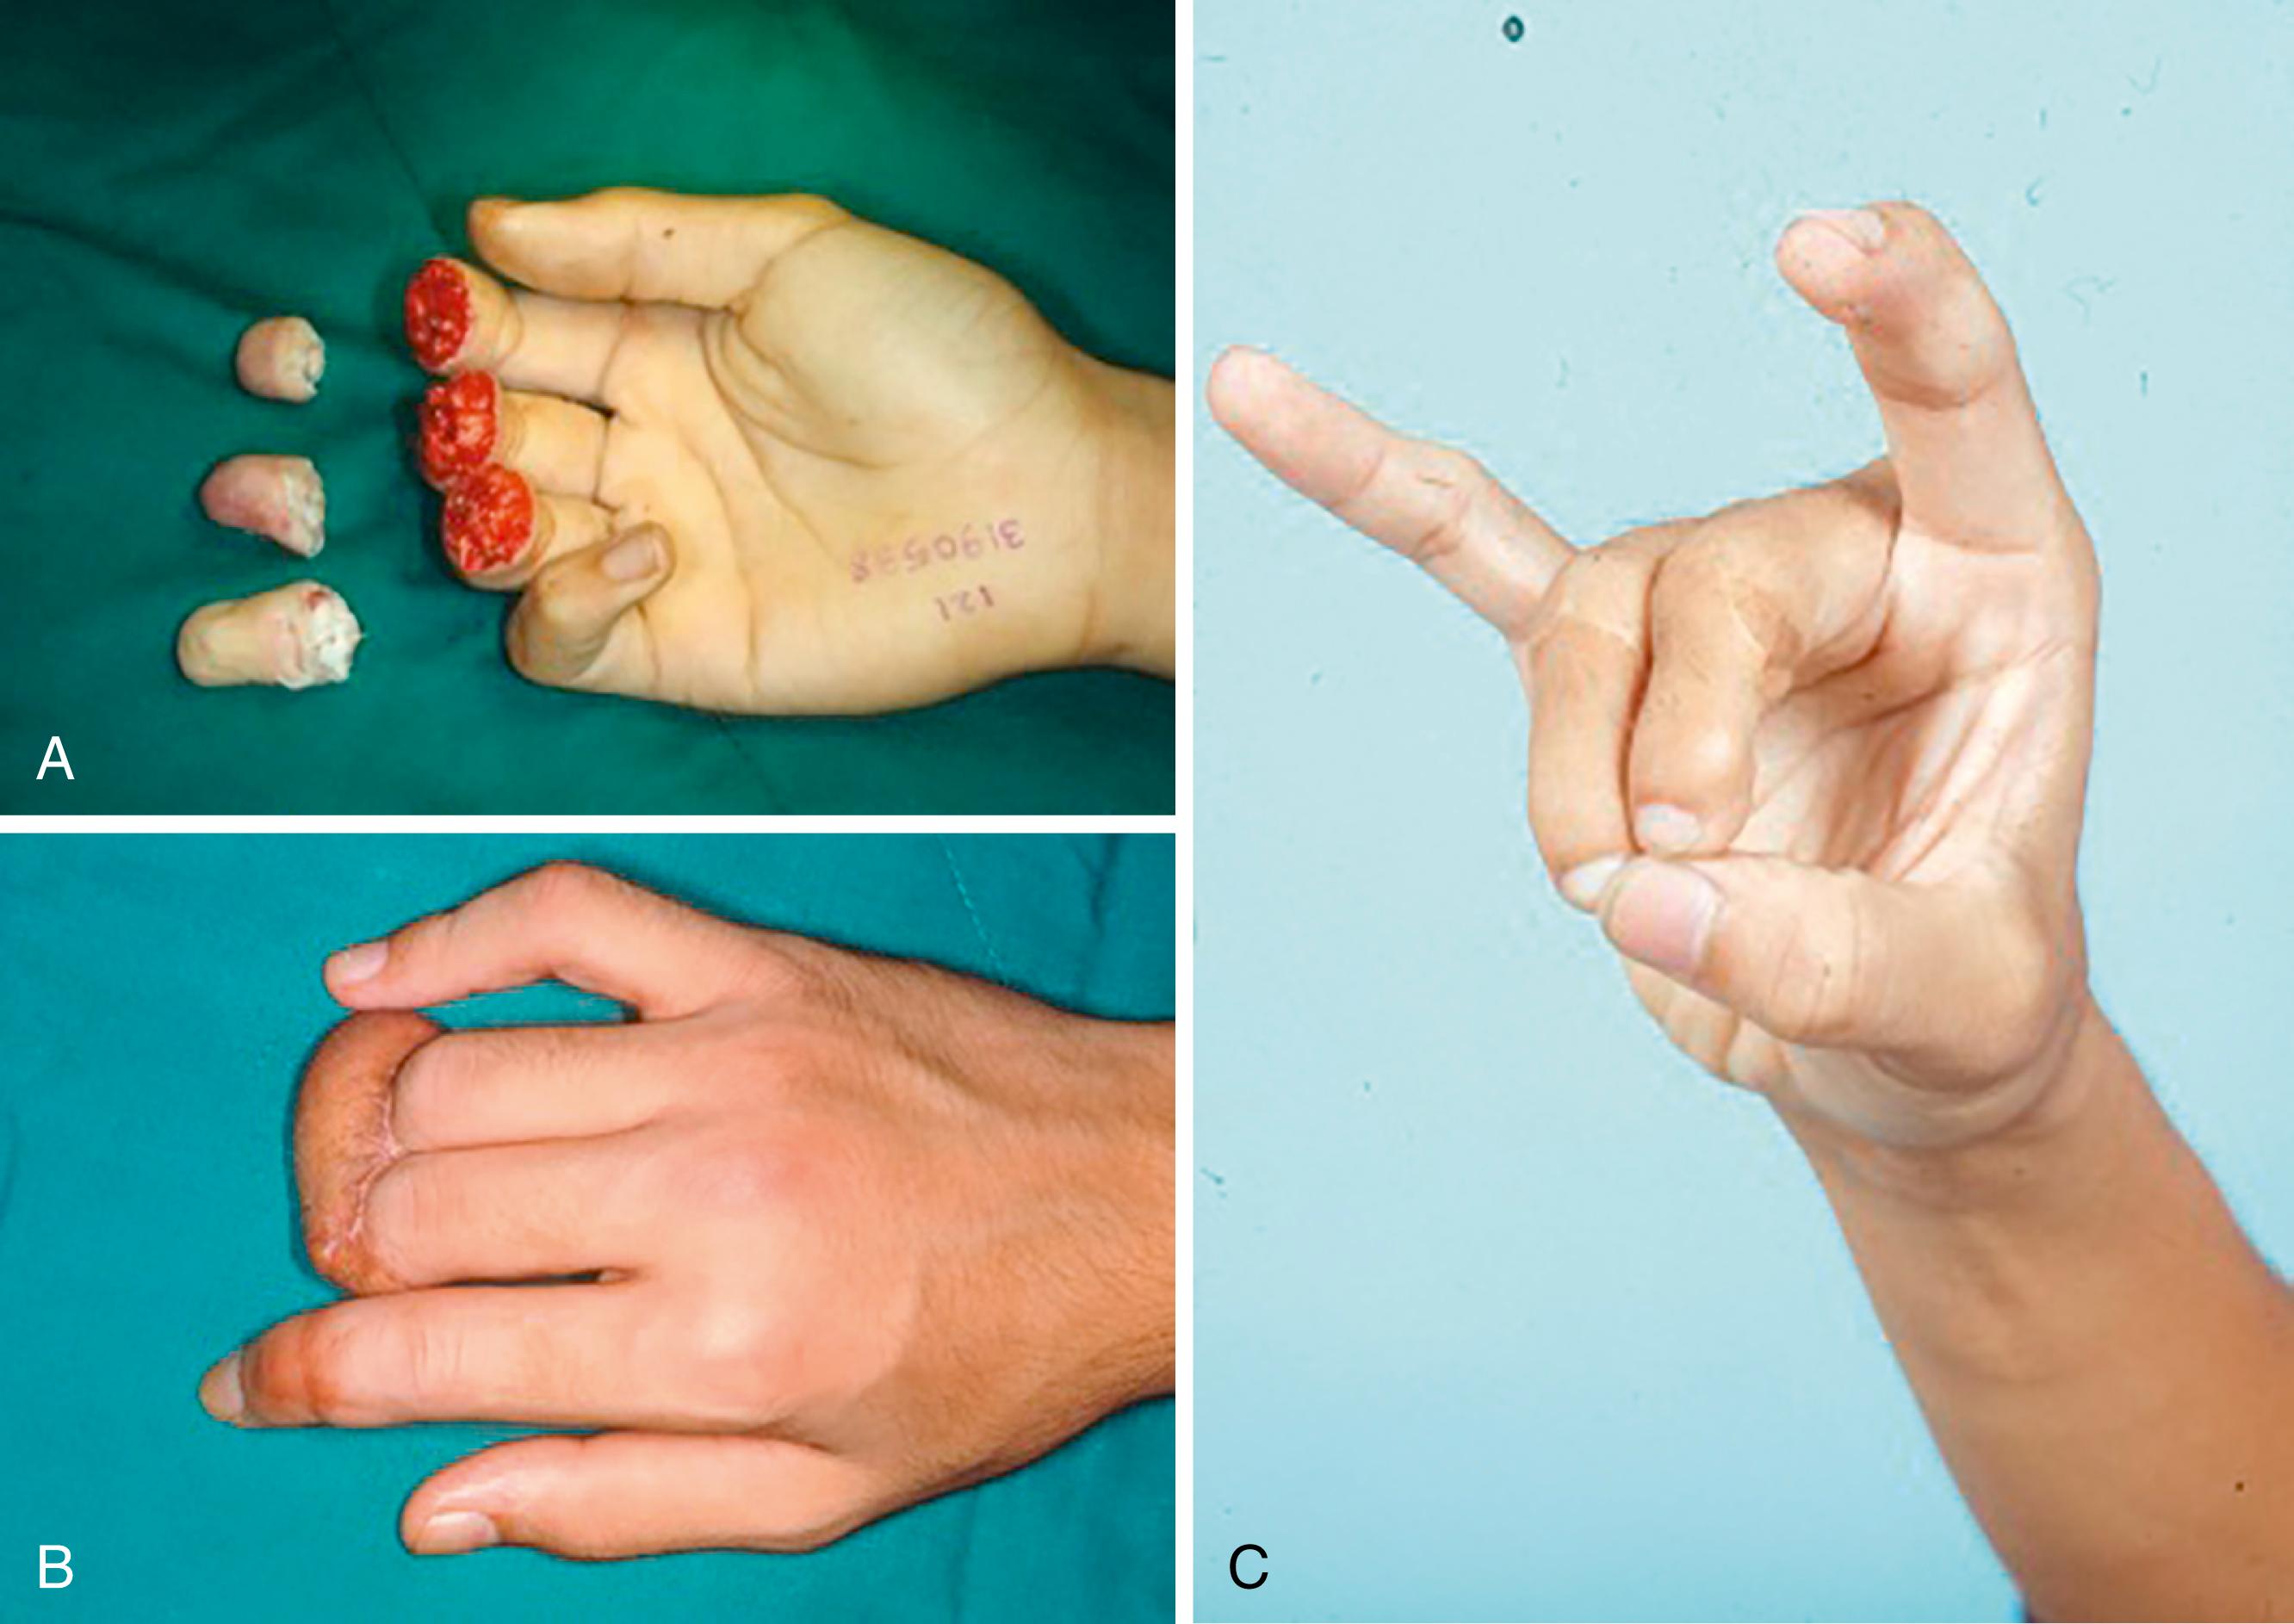 Fig. 47.1, A, Distal amputation of the index, middle, and ring fingers. B, Only the index finger was successfully replanted, and the middle and ring finger stumps were covered with a pedicled groin flap after debridement and preservation of the fingers’ skeleton, tendons, and neurovascular bundle length. C, Final result showing pinch function after reconstruction involving bilateral partial second-toe simultaneous transplantation.